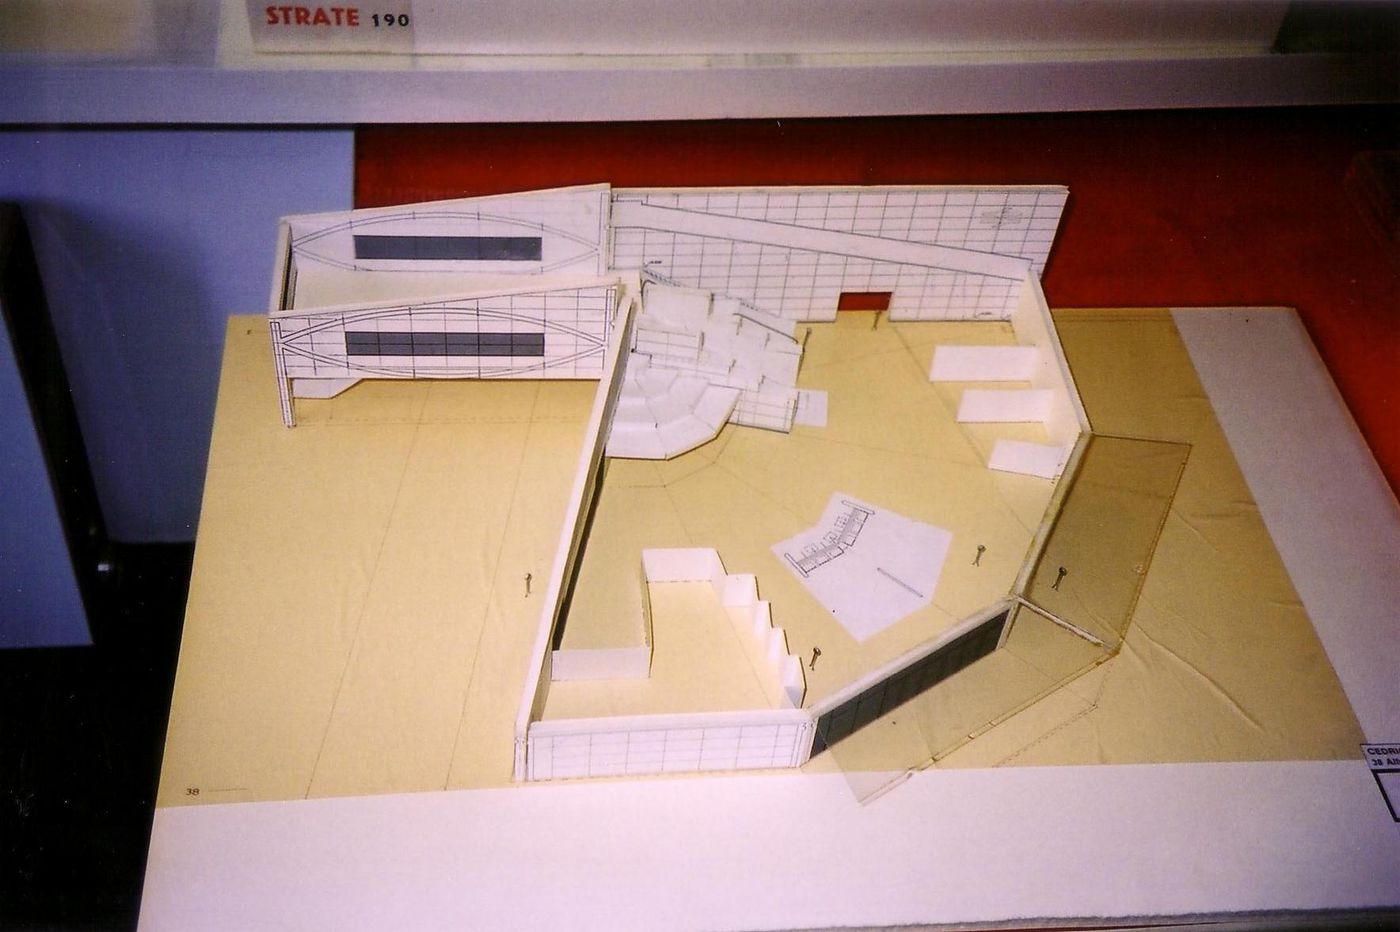 Scaled model showing interior of main concourse